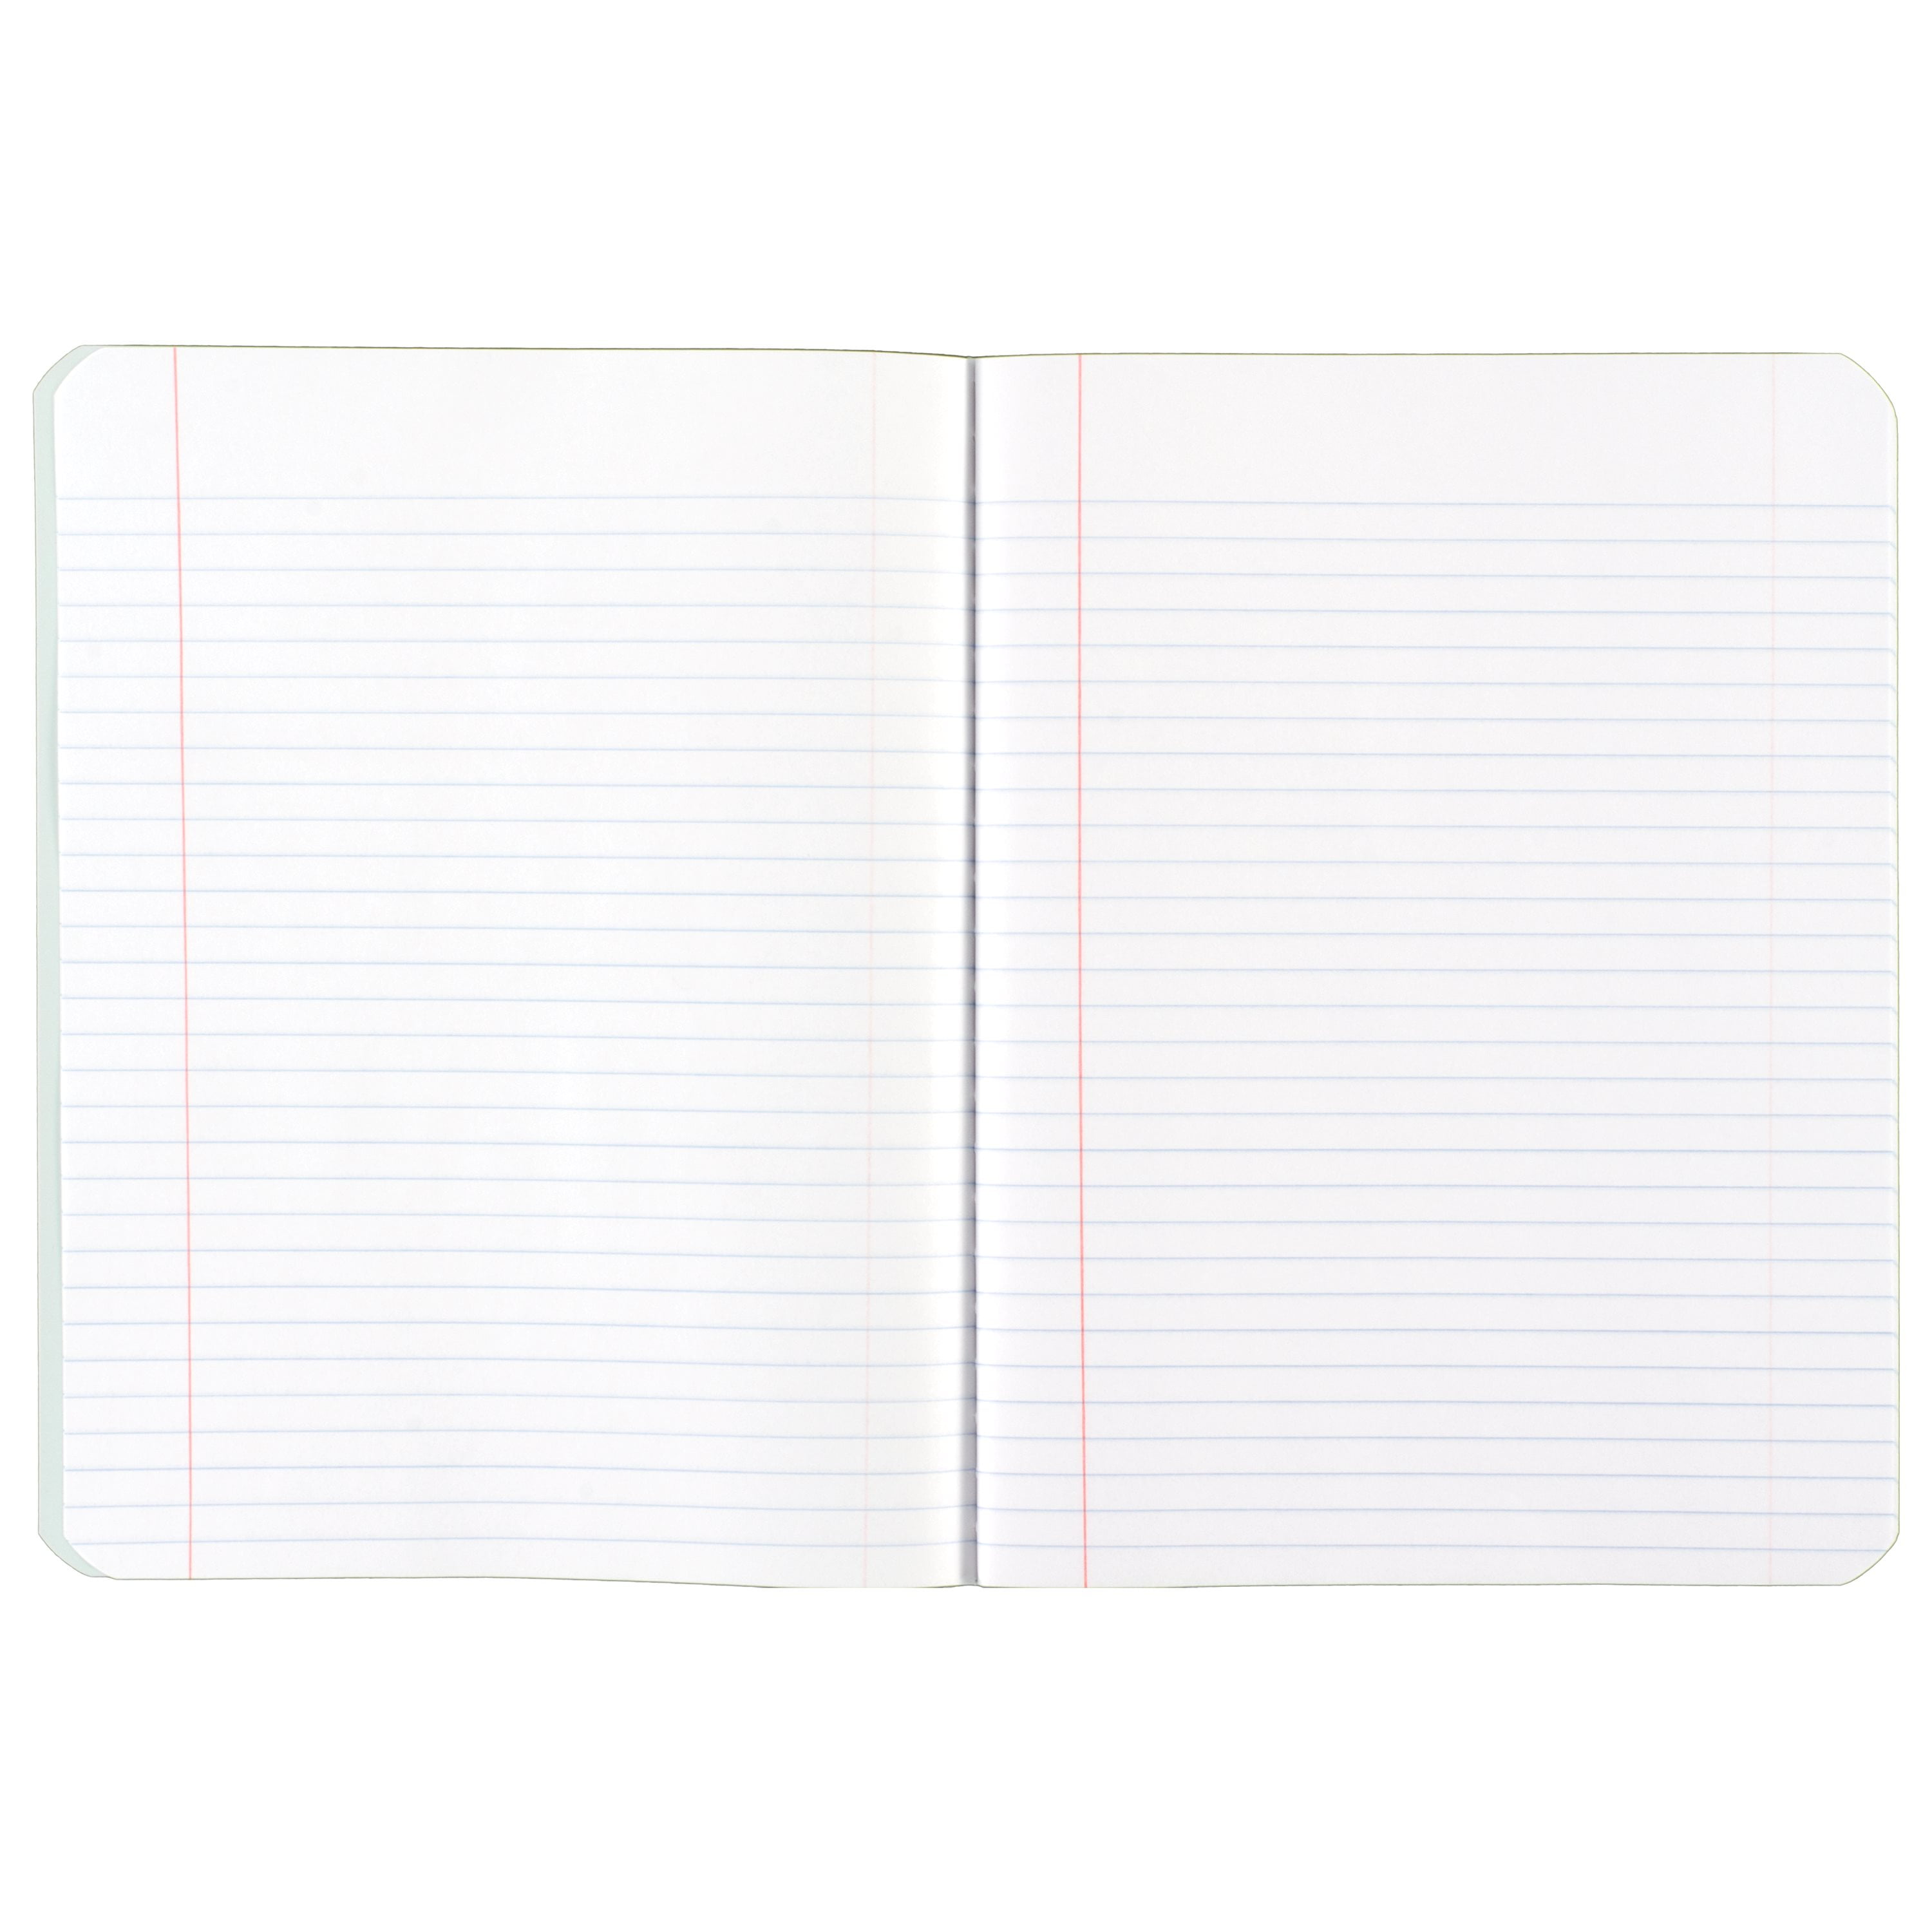 72490 White 9-1/2 x 7-1/2 100 Sheets College Ruled Paper Five Star Composition Book/Notebook 